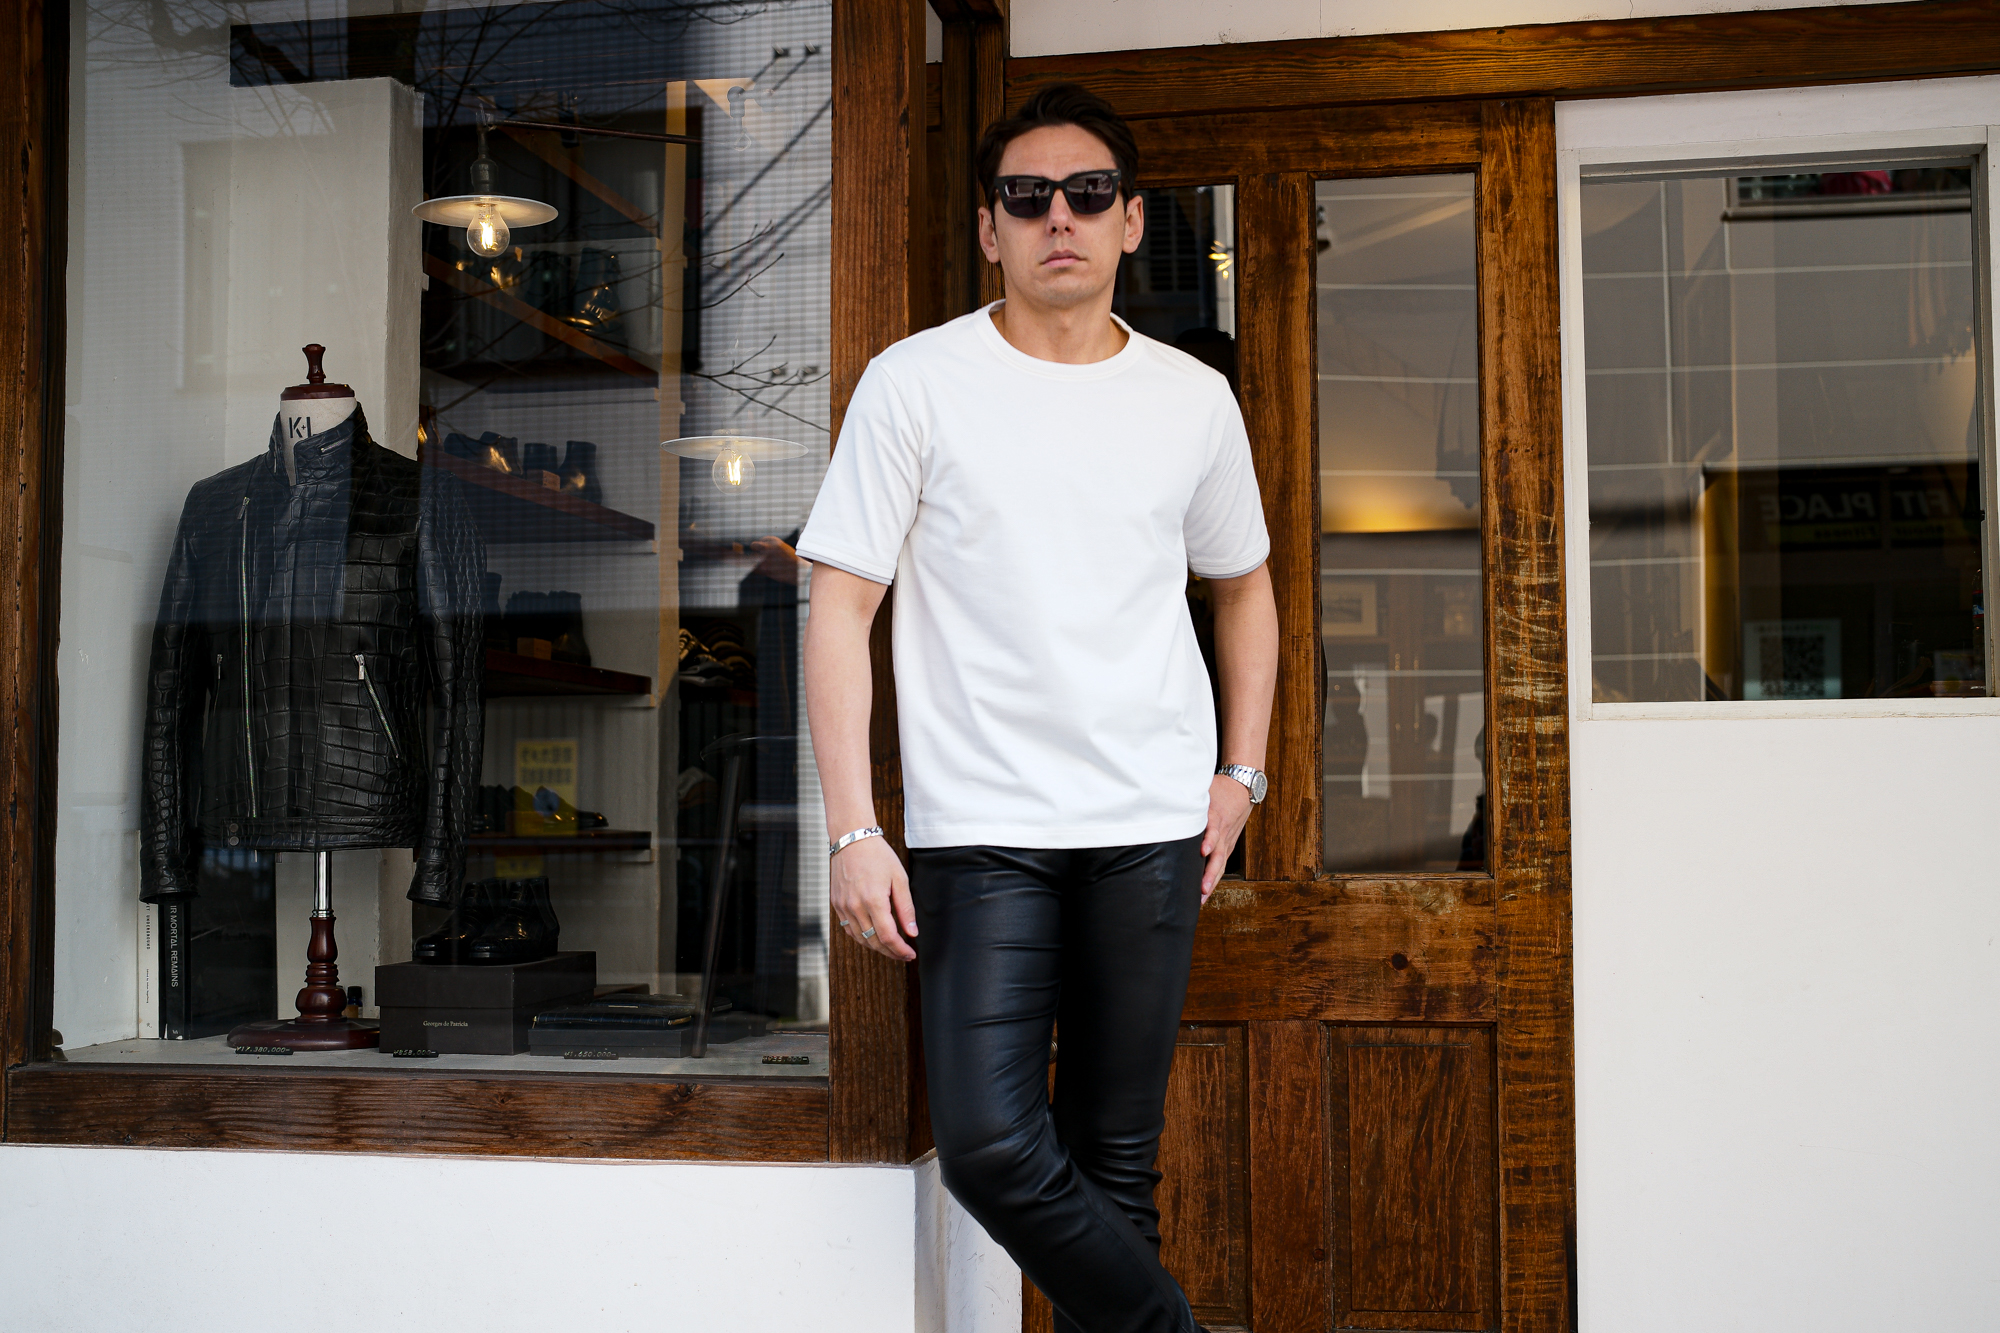 RIVORA (リヴォラ) Doule Sleeves T-Shirts ダブルスリーブ Tシャツ WHITE (ホワイト・030) MADE IN JAPAN (日本製) 2024春夏新作 愛知　名古屋 Alto e Diritto altoediritto アルトエデリット